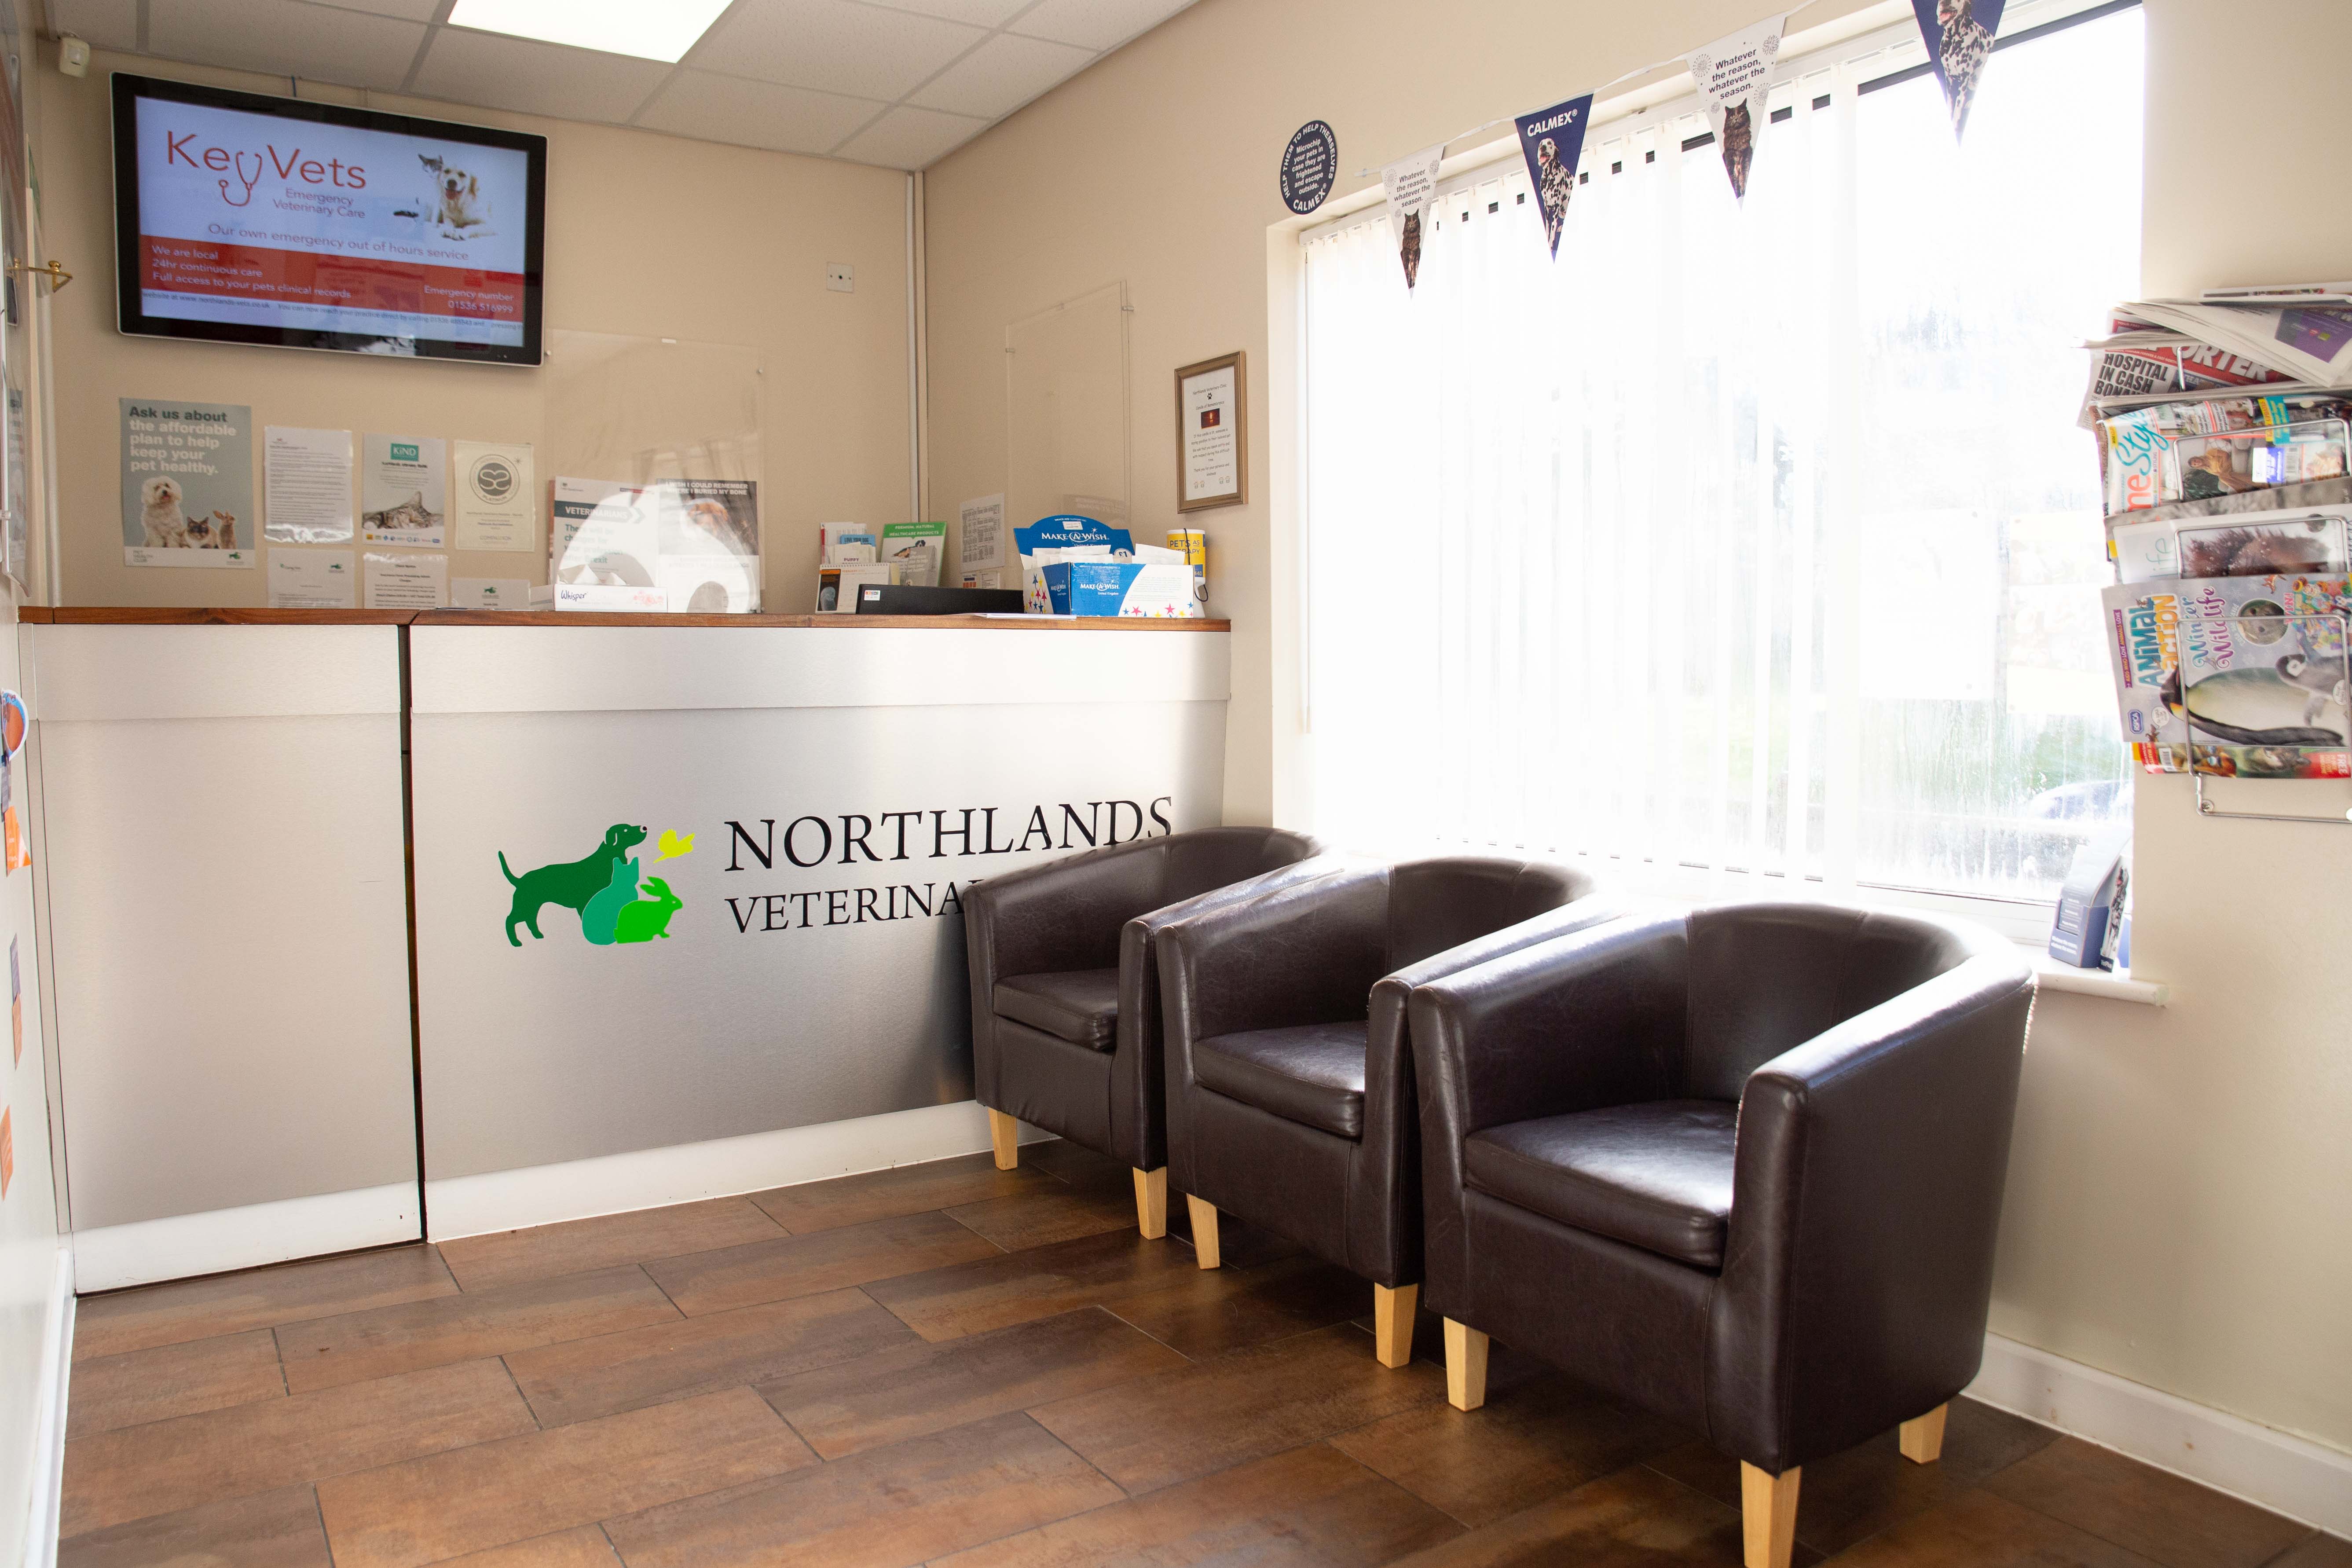 Images Northlands Veterinary Group, Raunds